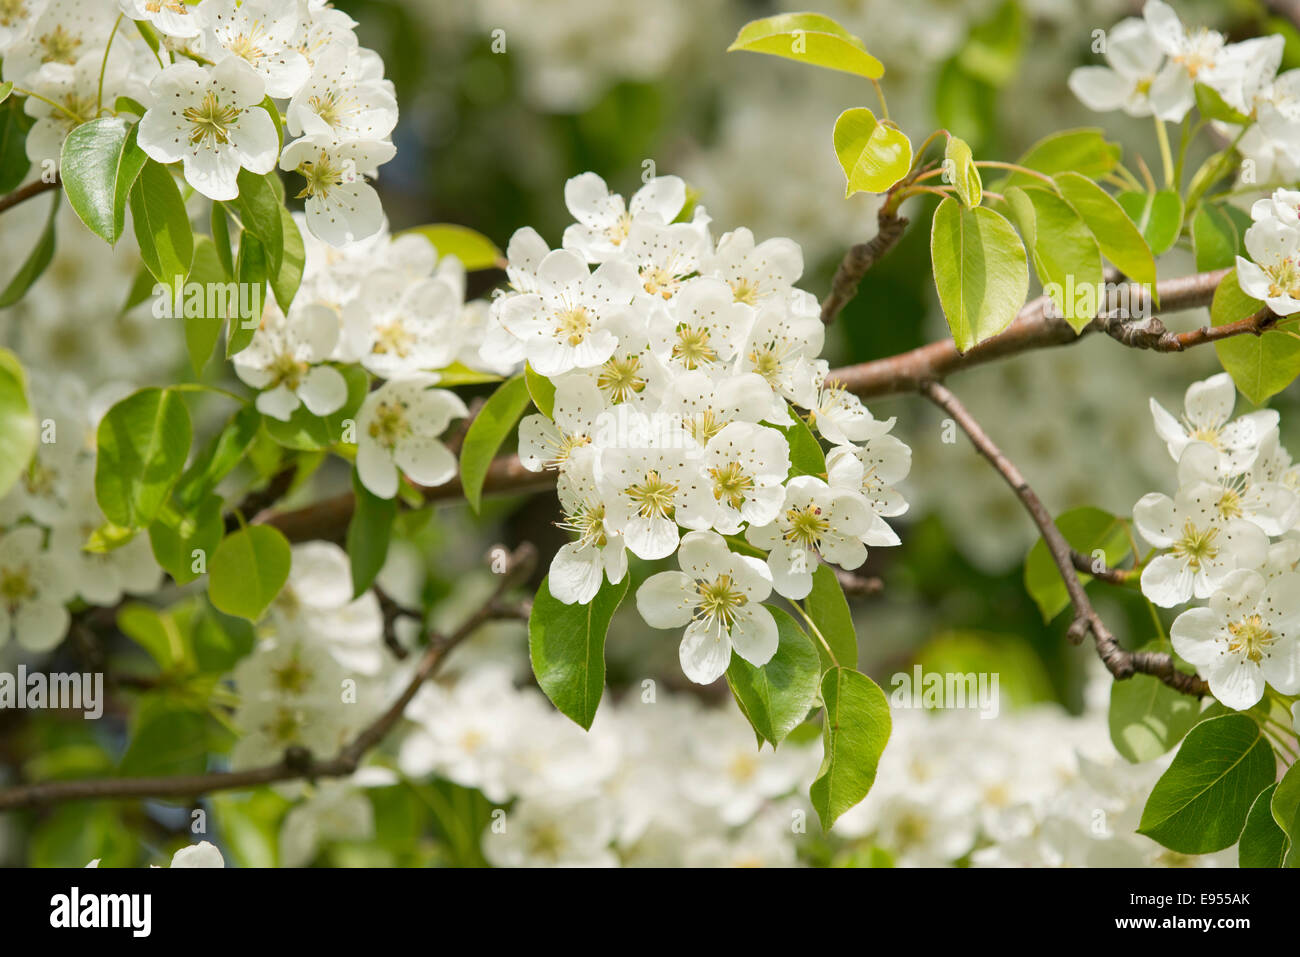 Pear tree (Pyrus communis), cultivar, branch with blossoms and leaves, Thuringia, Germany Stock Photo